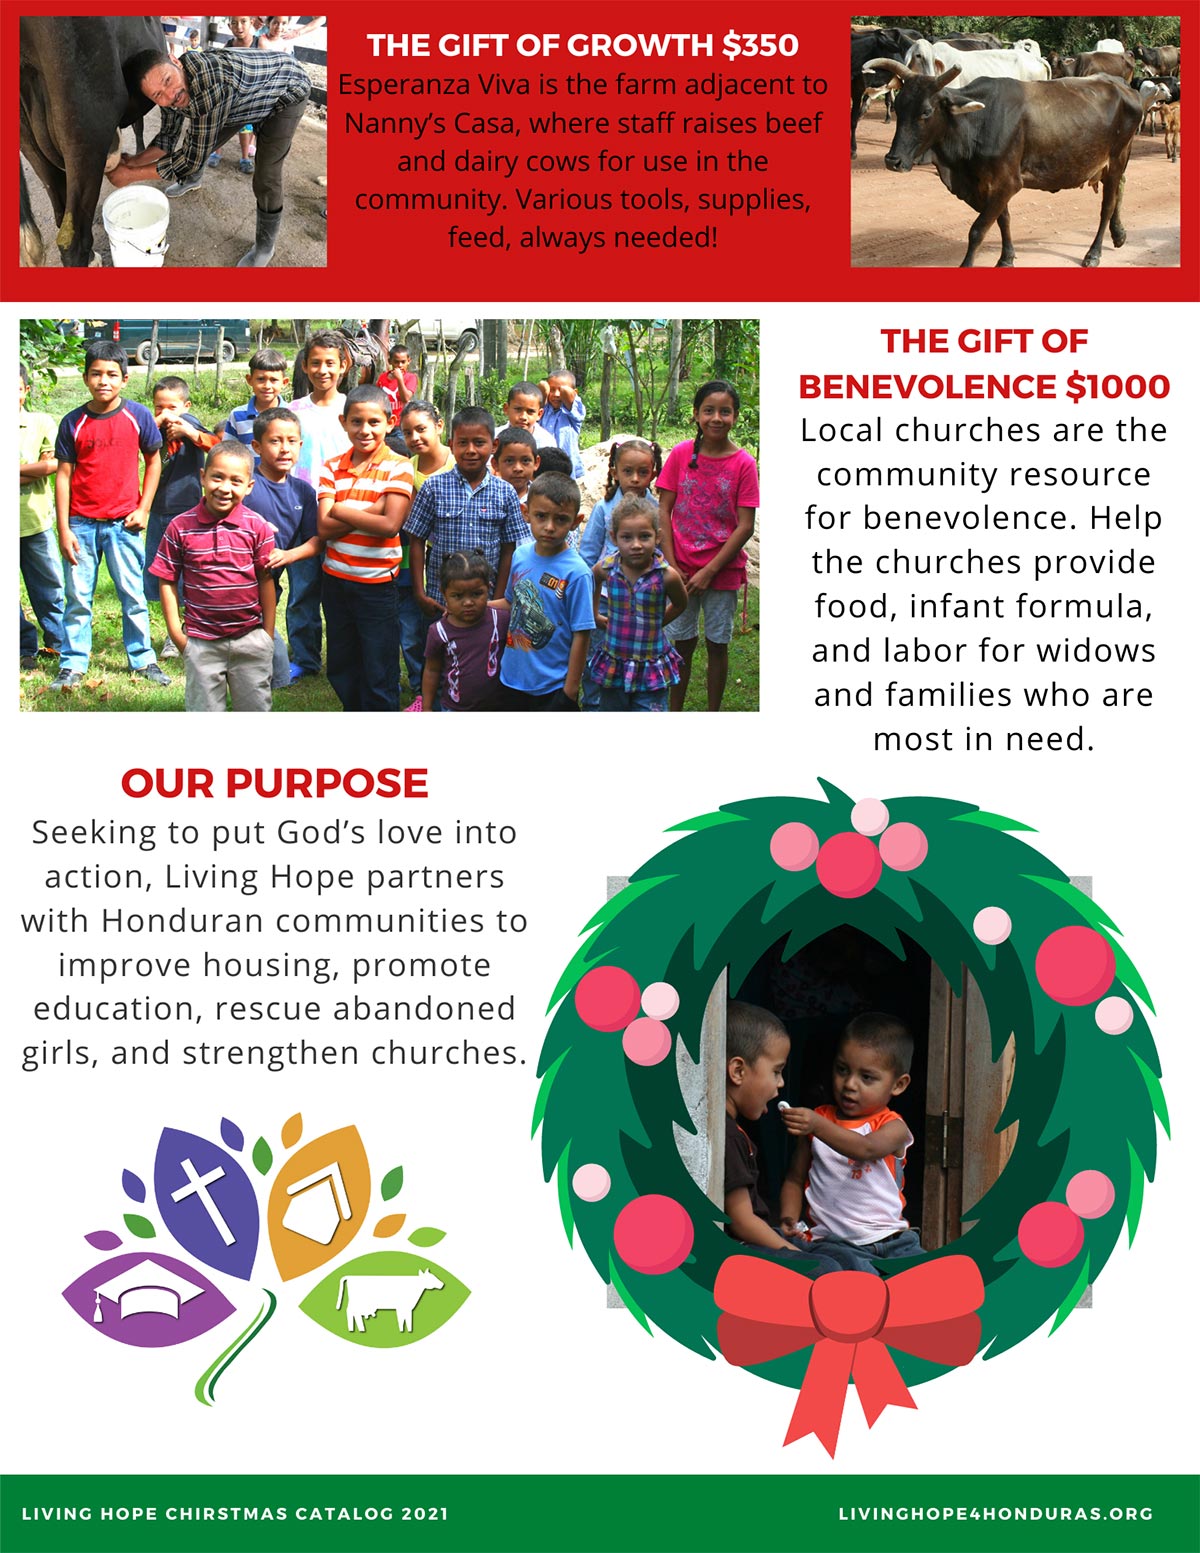 Page 3 of the Living Hope for Honduras Christmas Catalog, which outlines various levels of gifts that donors can contribute.